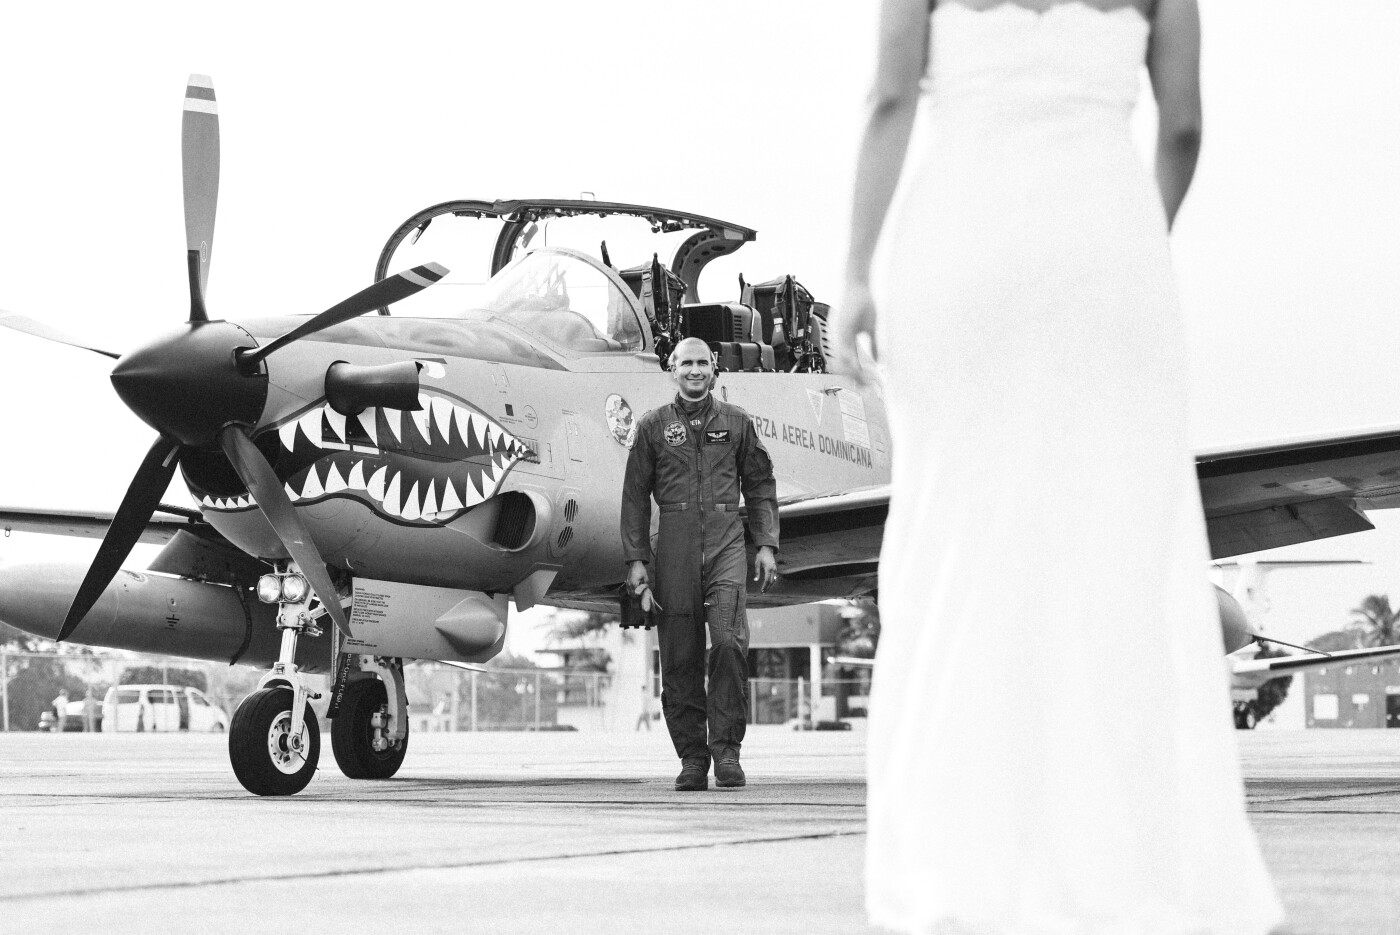 Amin is an air force pilot from his country's fighter squadron and the couple wish was for their photos to represent what he loves to do most, to fly.<br />
I took a glance at this picturesque airplane and immediately they got into the role, a safe return from a  mission, to Cristina his beautiful and loving bride.<br />
The moment was emotional, full of meaning and hope. The frame captured the beauty of it.